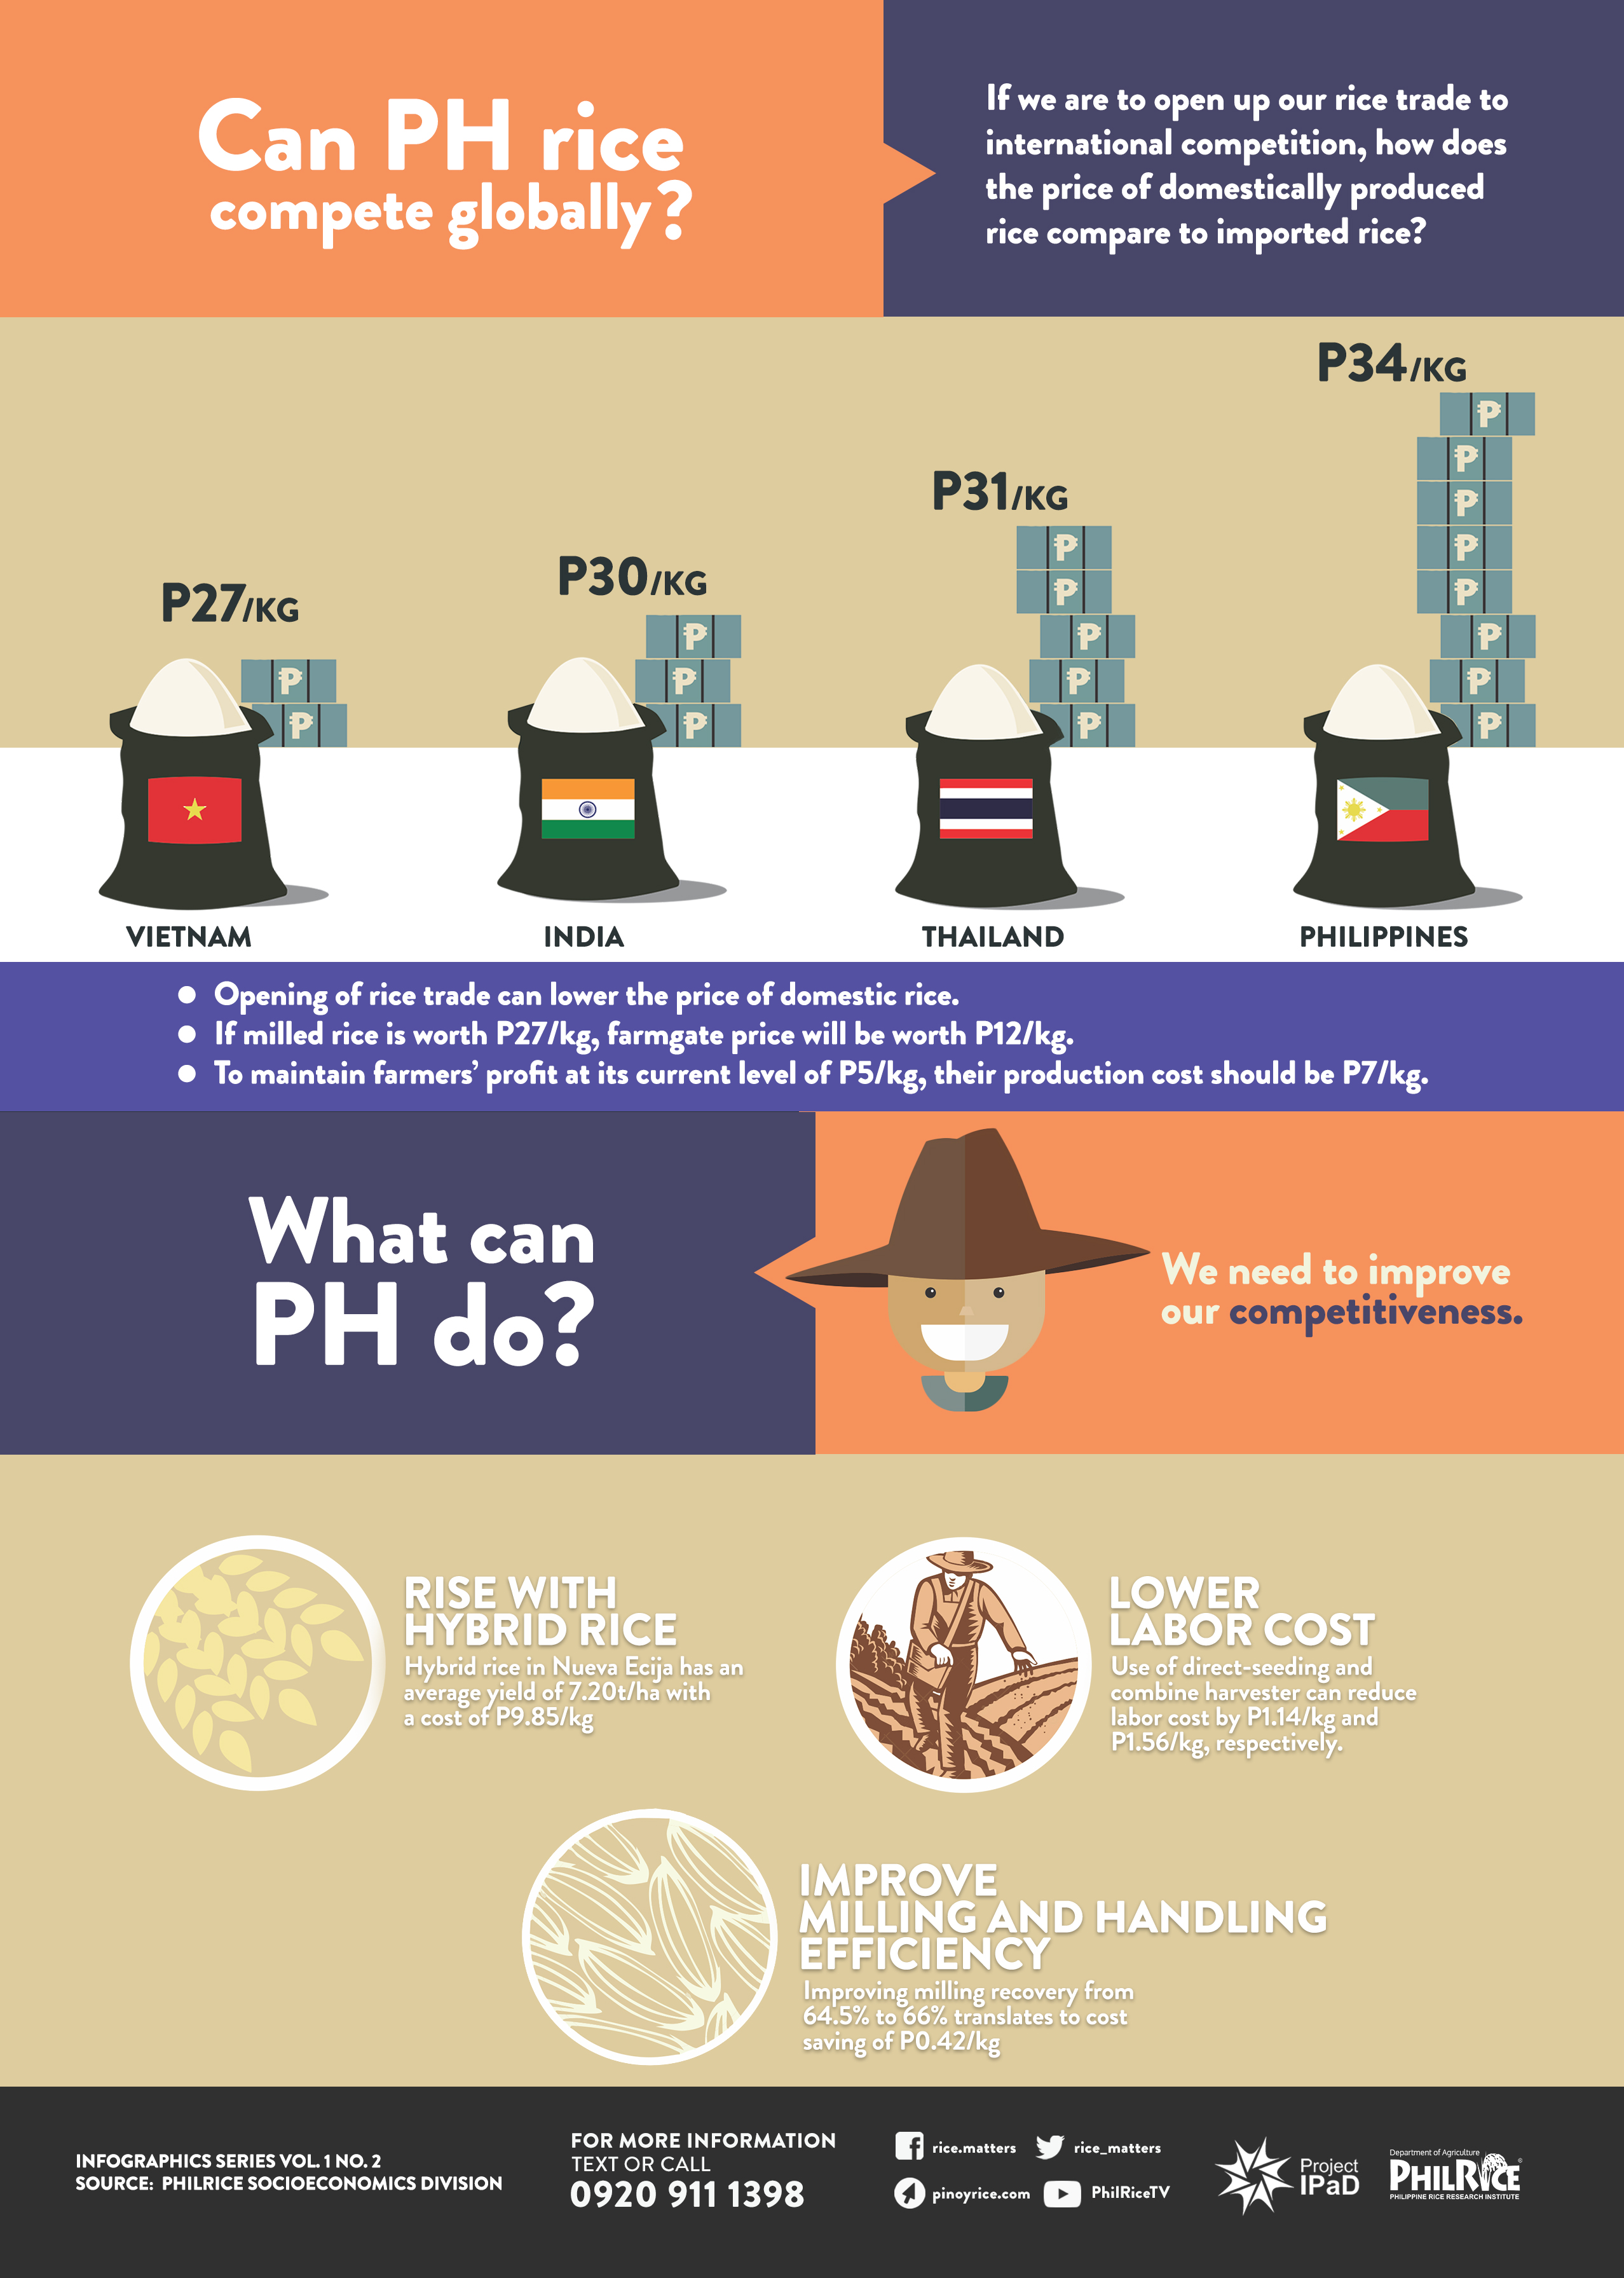 can PH rice compete globally?